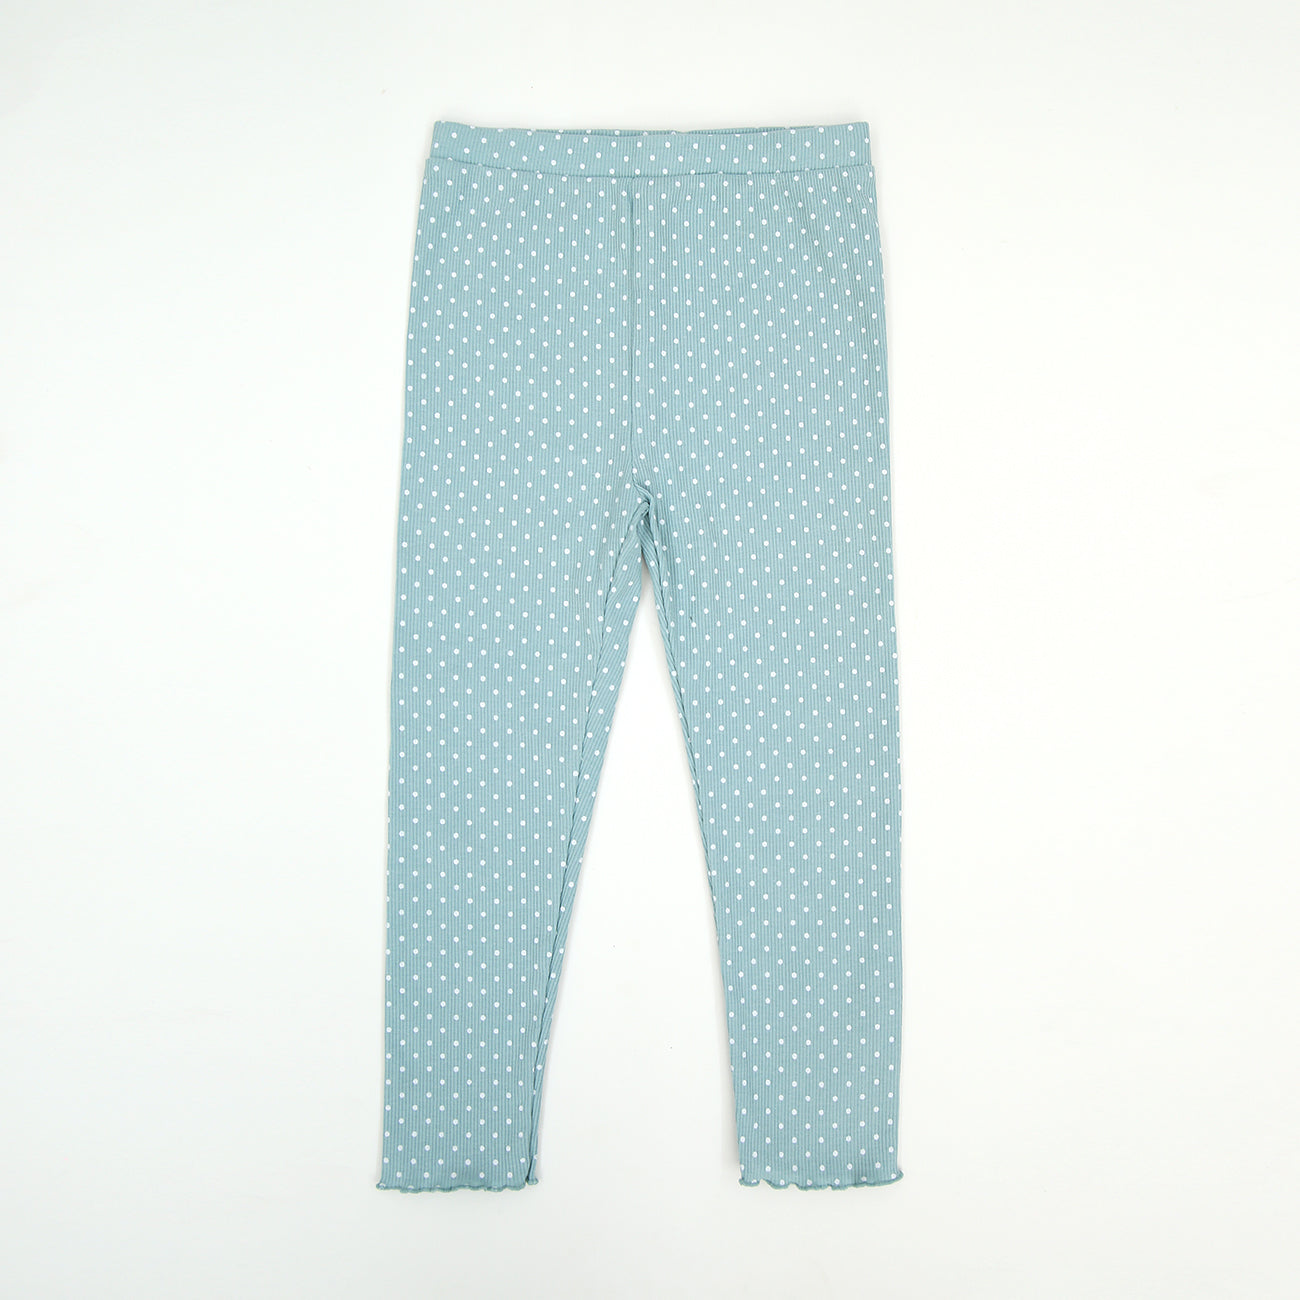 Imported All-Over Doted Printed Soft Cotton Rib Legging For Girls (11565)